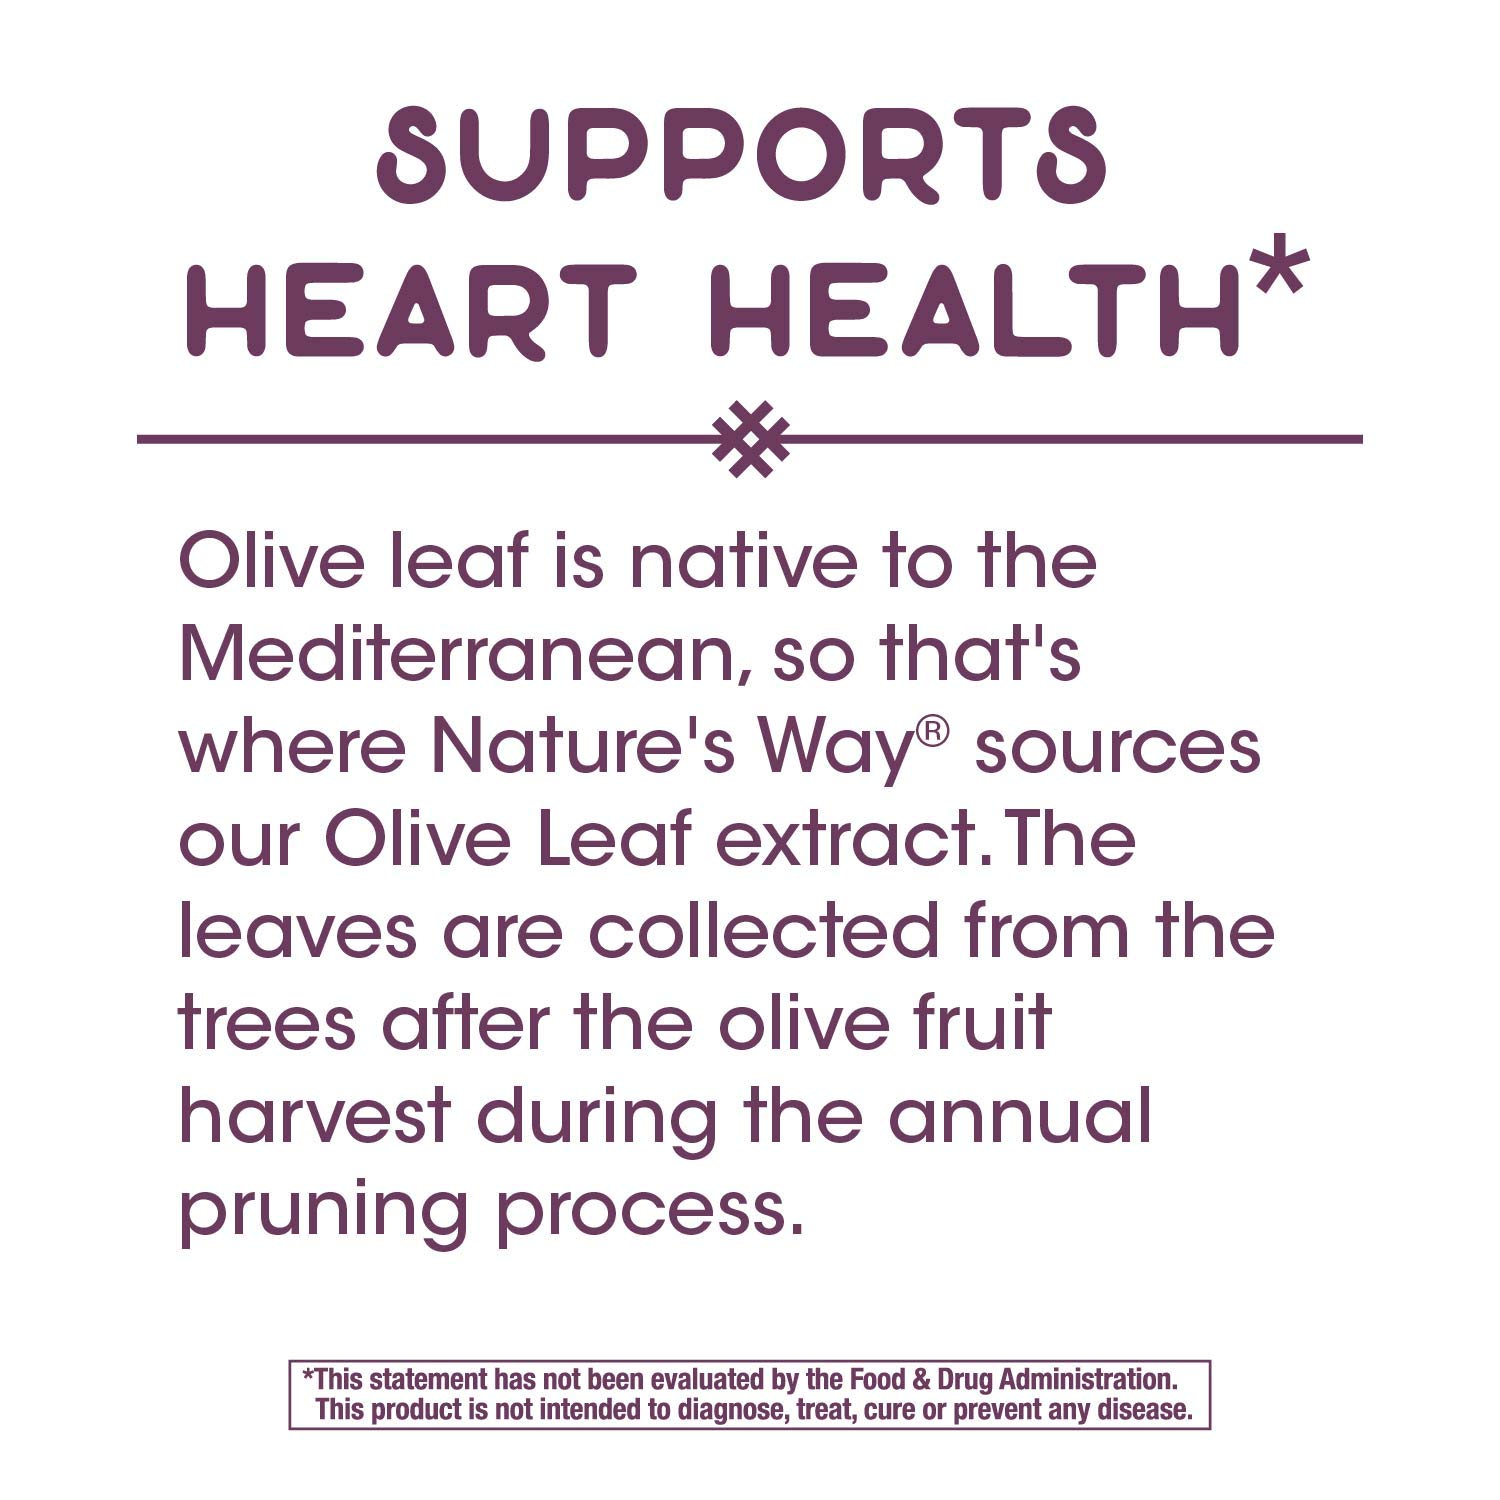 Nature's Way Premium Extract Olive Leaf Supplement, Supports Heart Health*, 250mg Per Serving, 60 Capsules